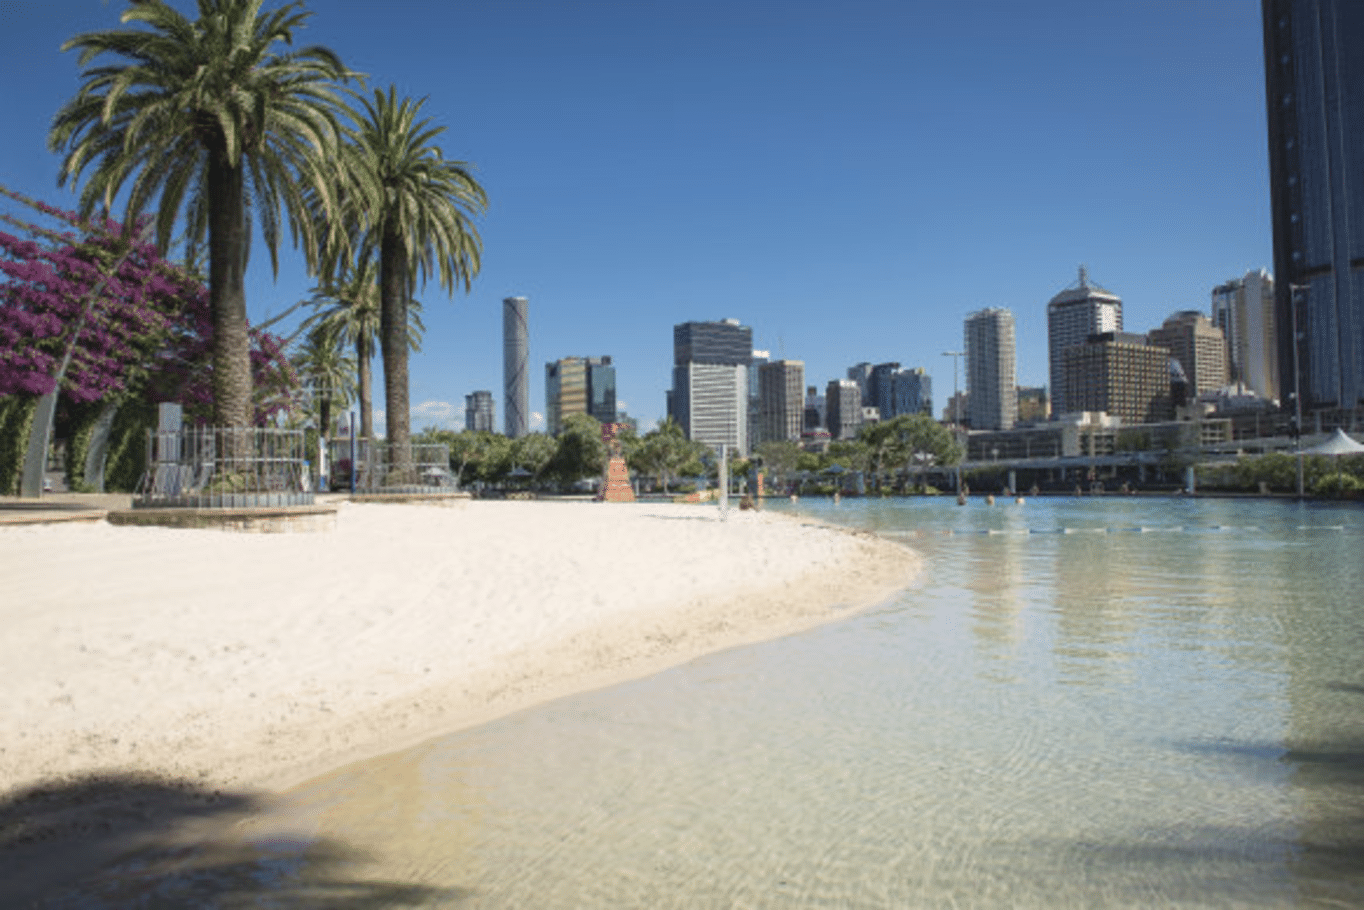 20 Surprising Things About Brisbane That Will Amaze First-Time Visitors